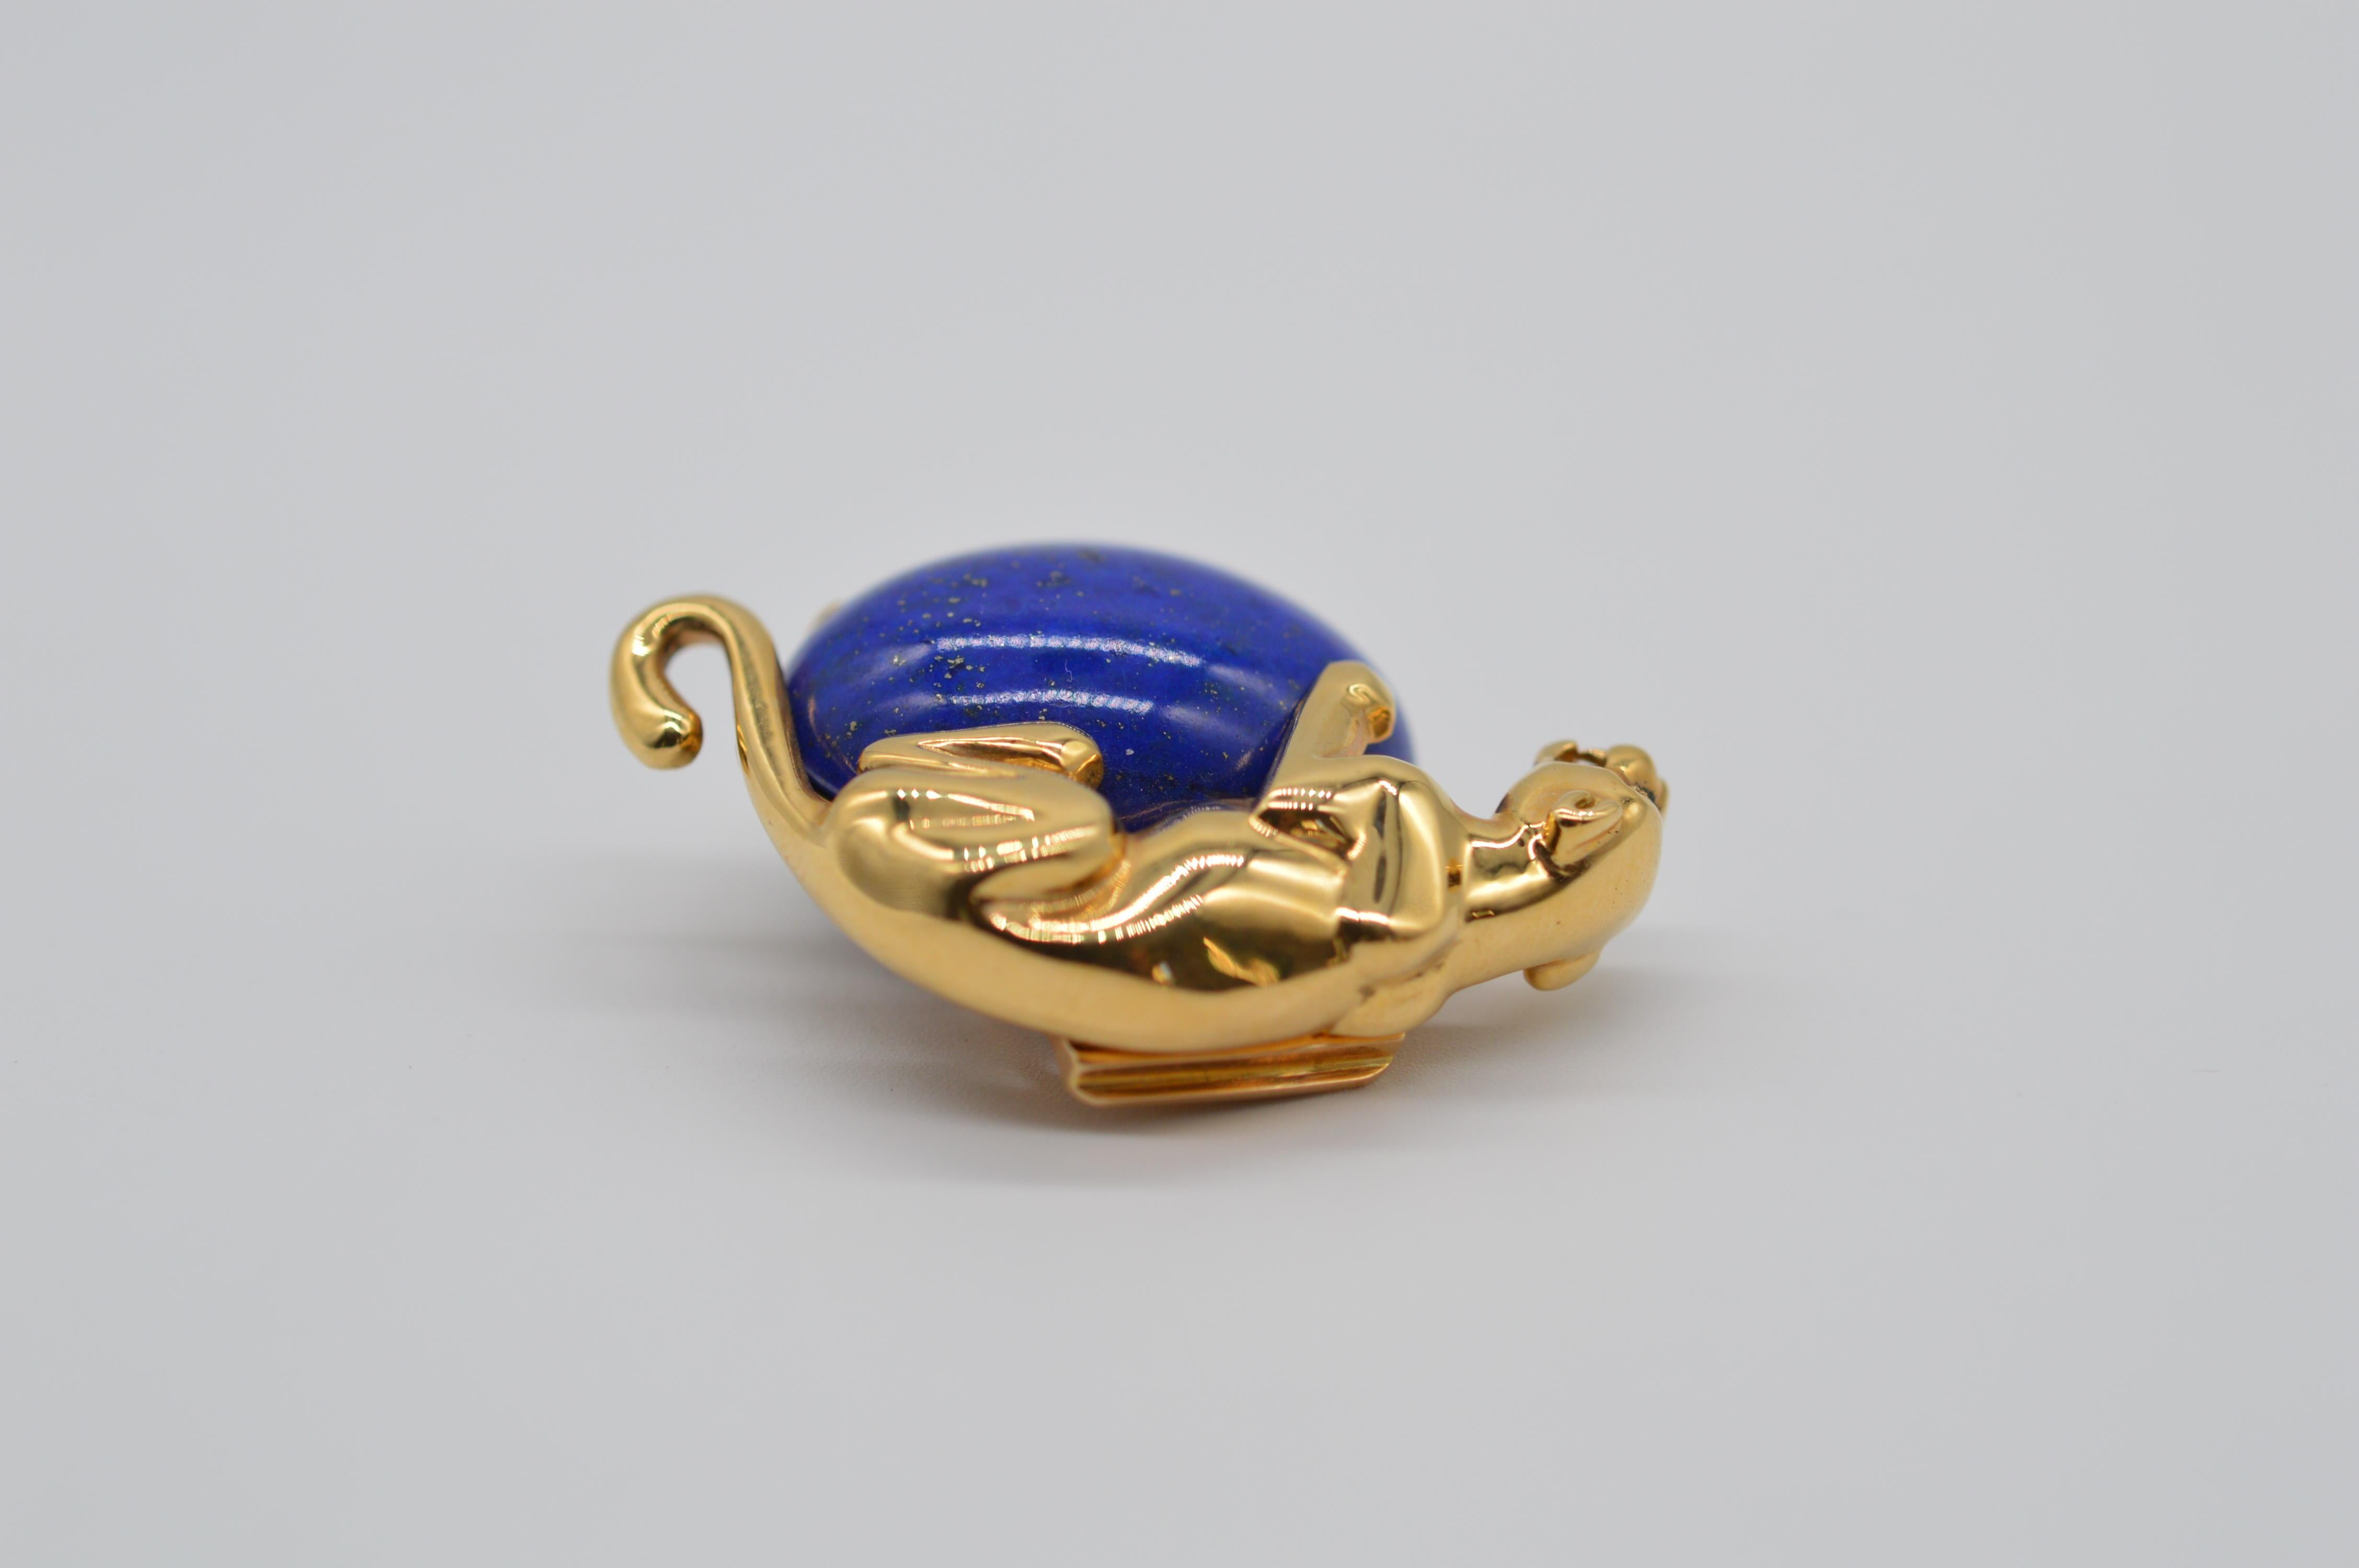 Cabochon Cartier Panthère Lapis Lazuli 18K Yellow Gold Brooch with Emerald Eyes Unworn For Sale